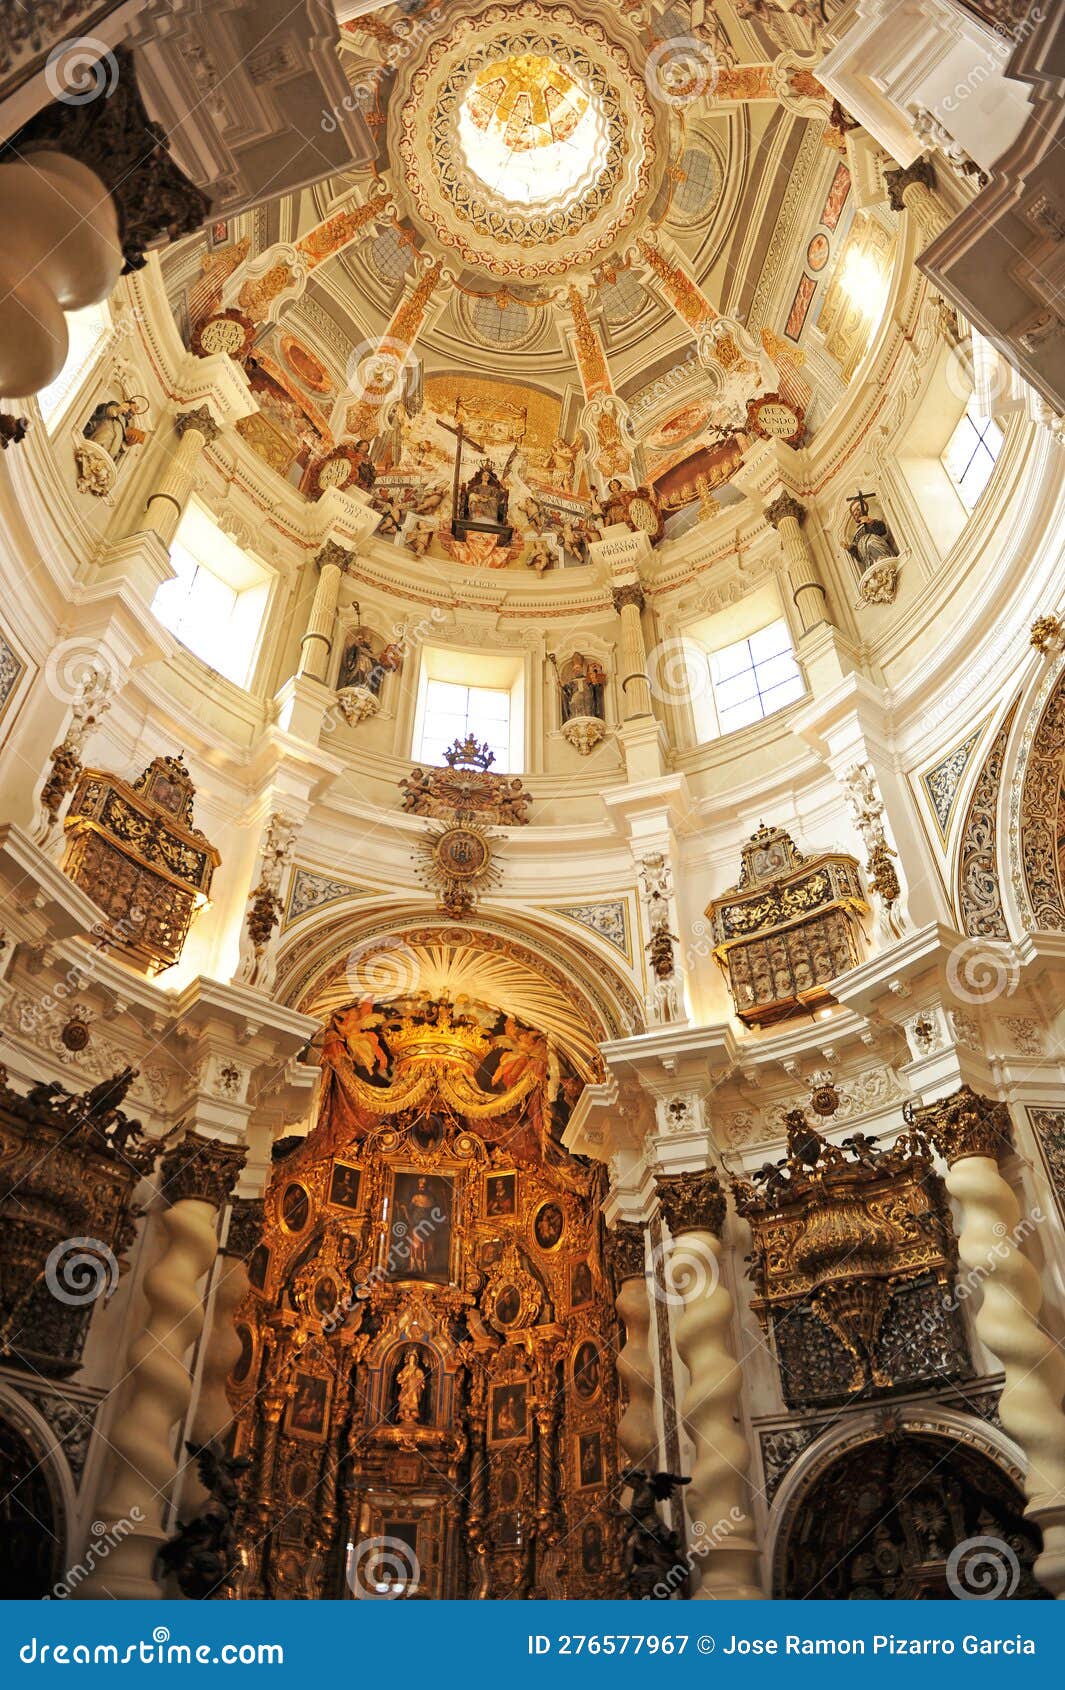 baroque dome of the church of san luis de los franceses (saint louis of the french) in seville, spain.